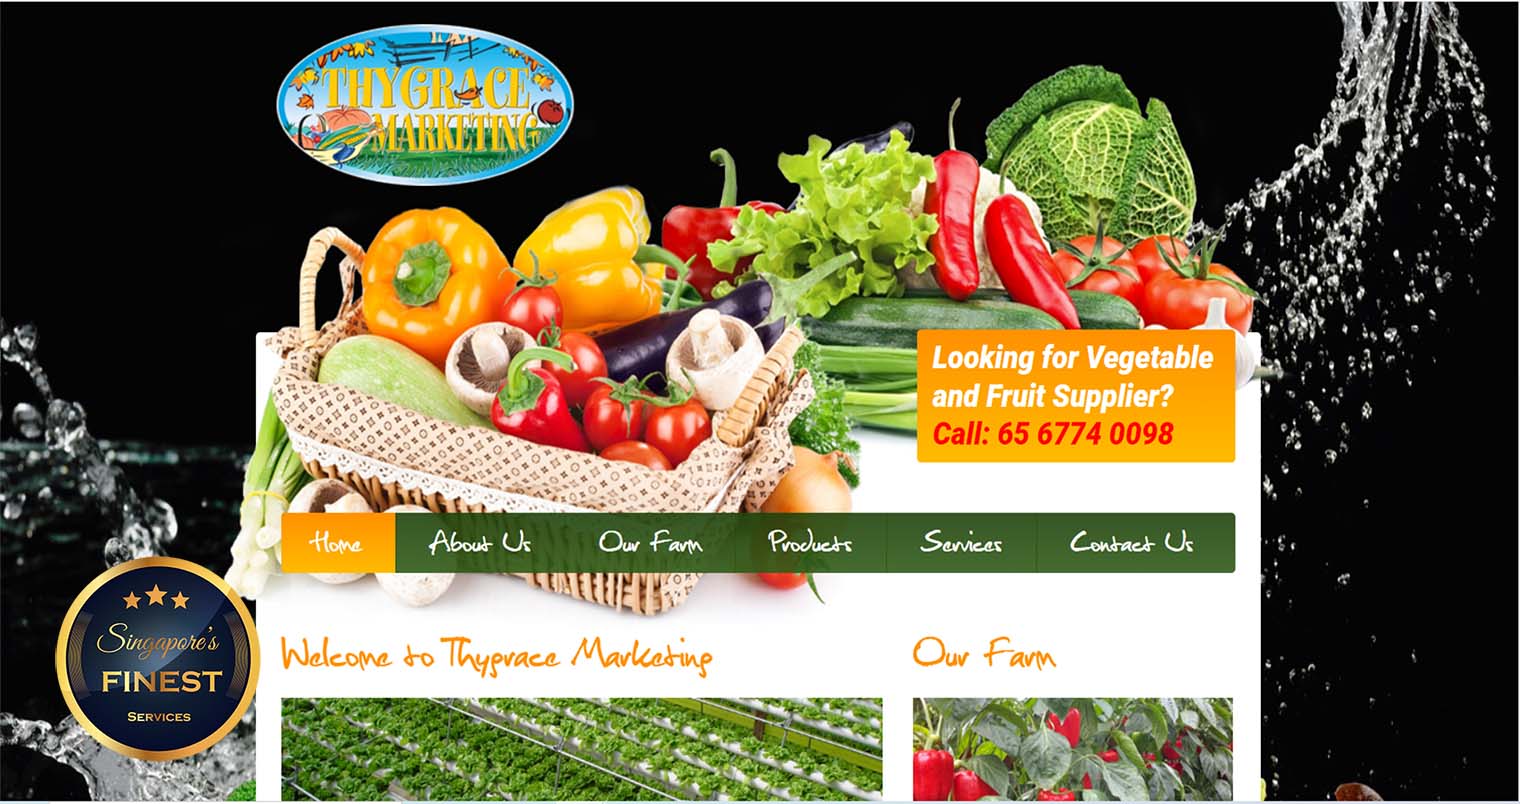 Thygrace Marketing - Vegetable Suppliers in Singapore